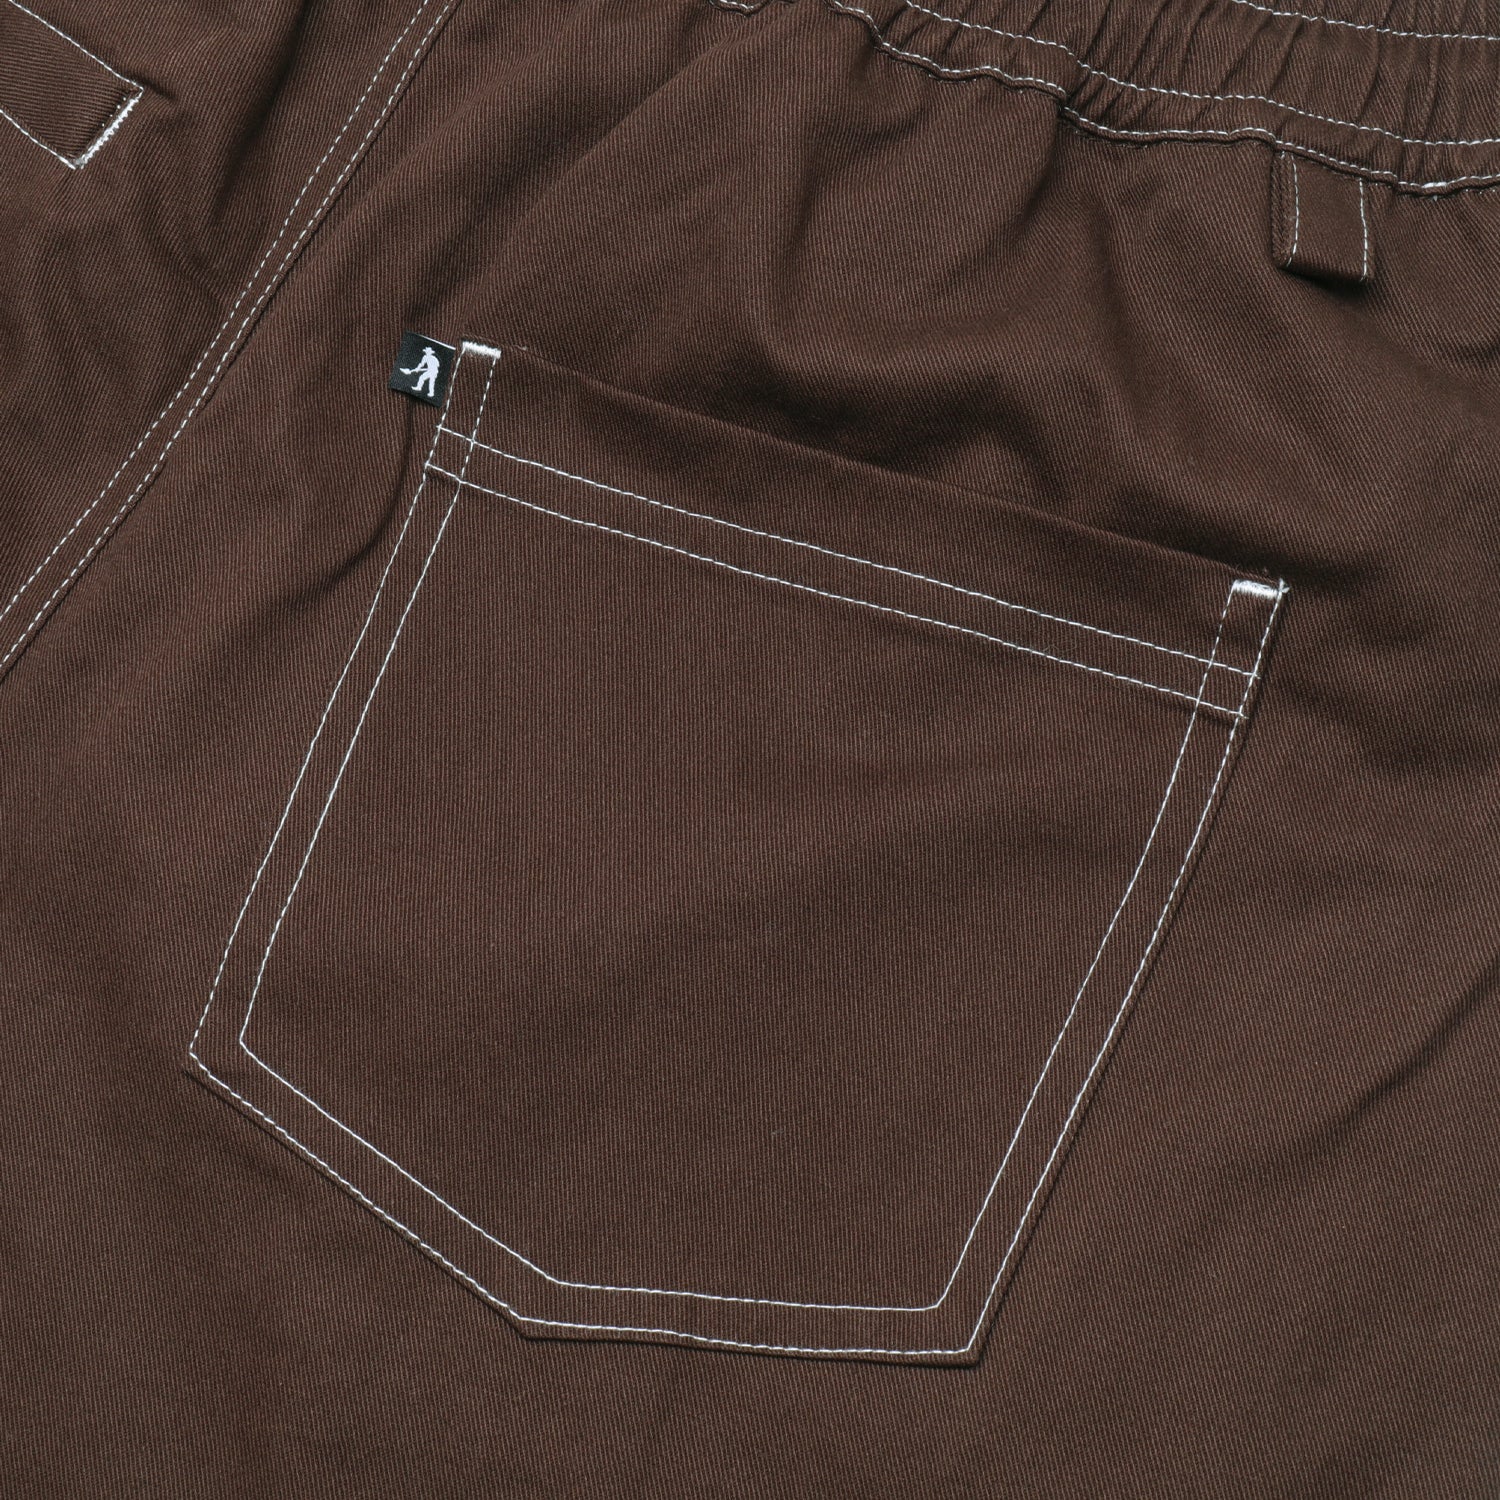 Pass~Port Crying Cow Casual Short - Choc